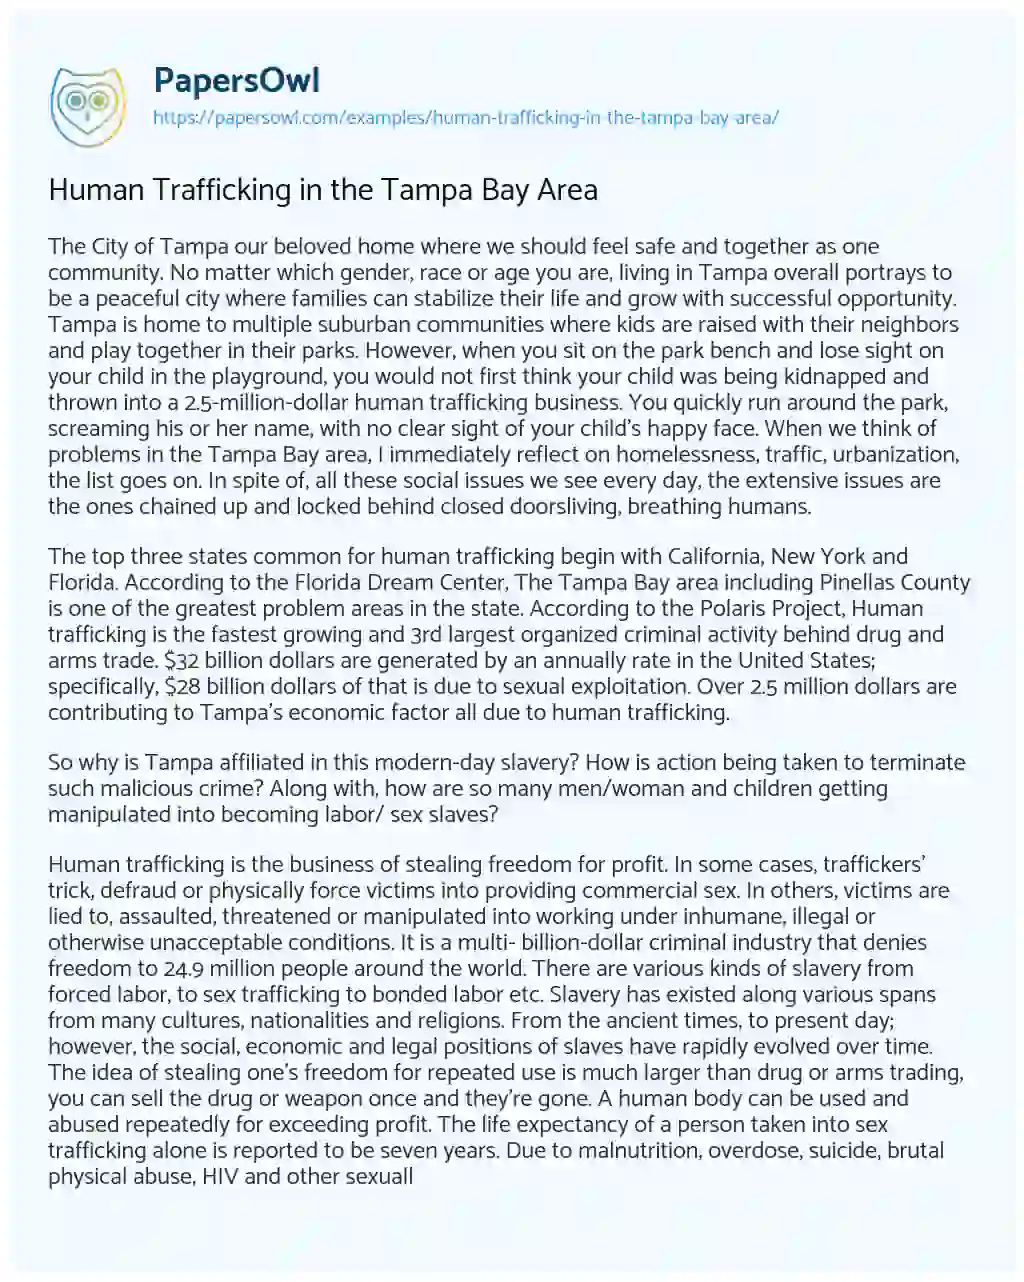 Essay on Human Trafficking in the Tampa Bay Area